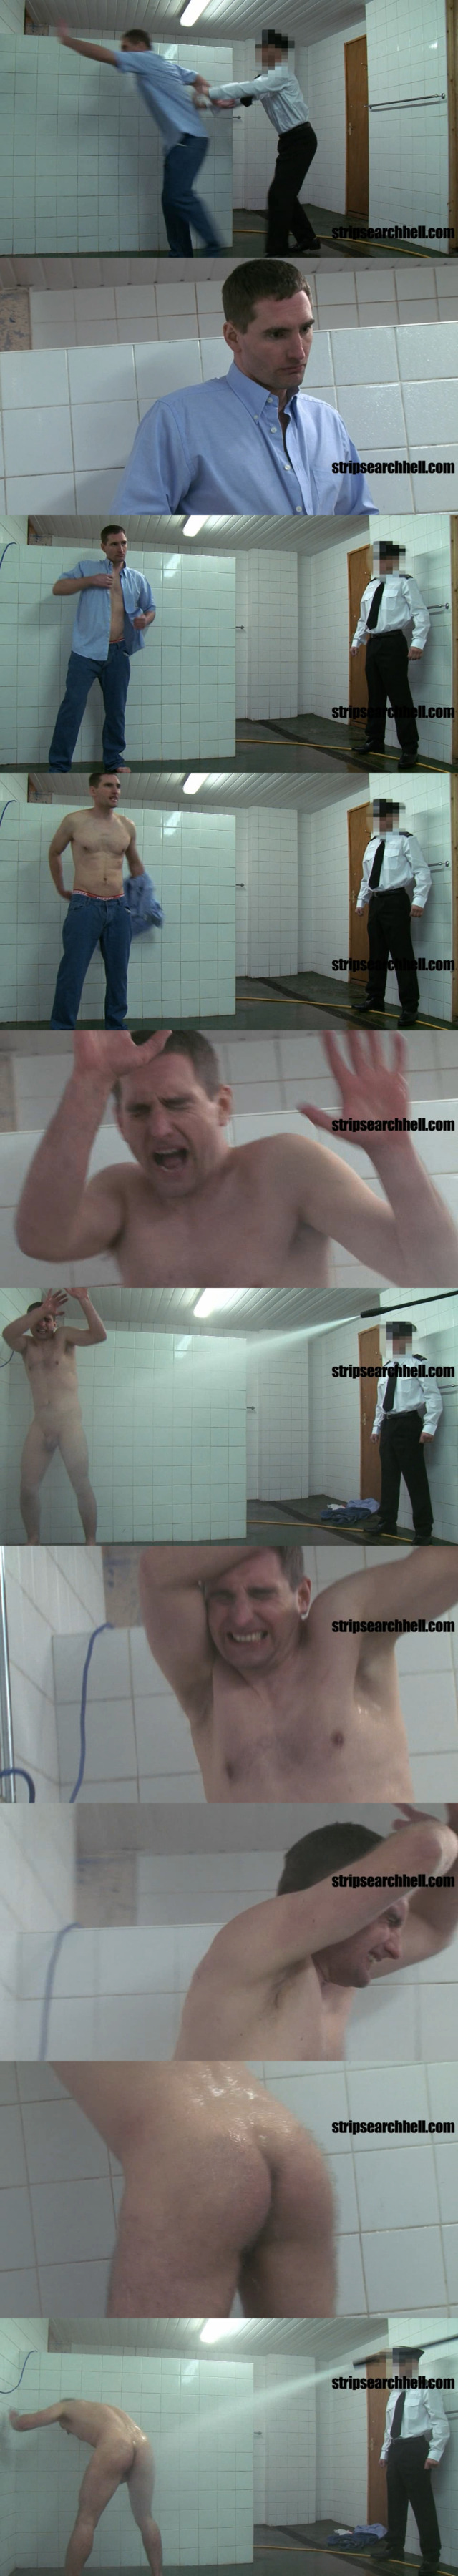 stripsearchhell man forced shower